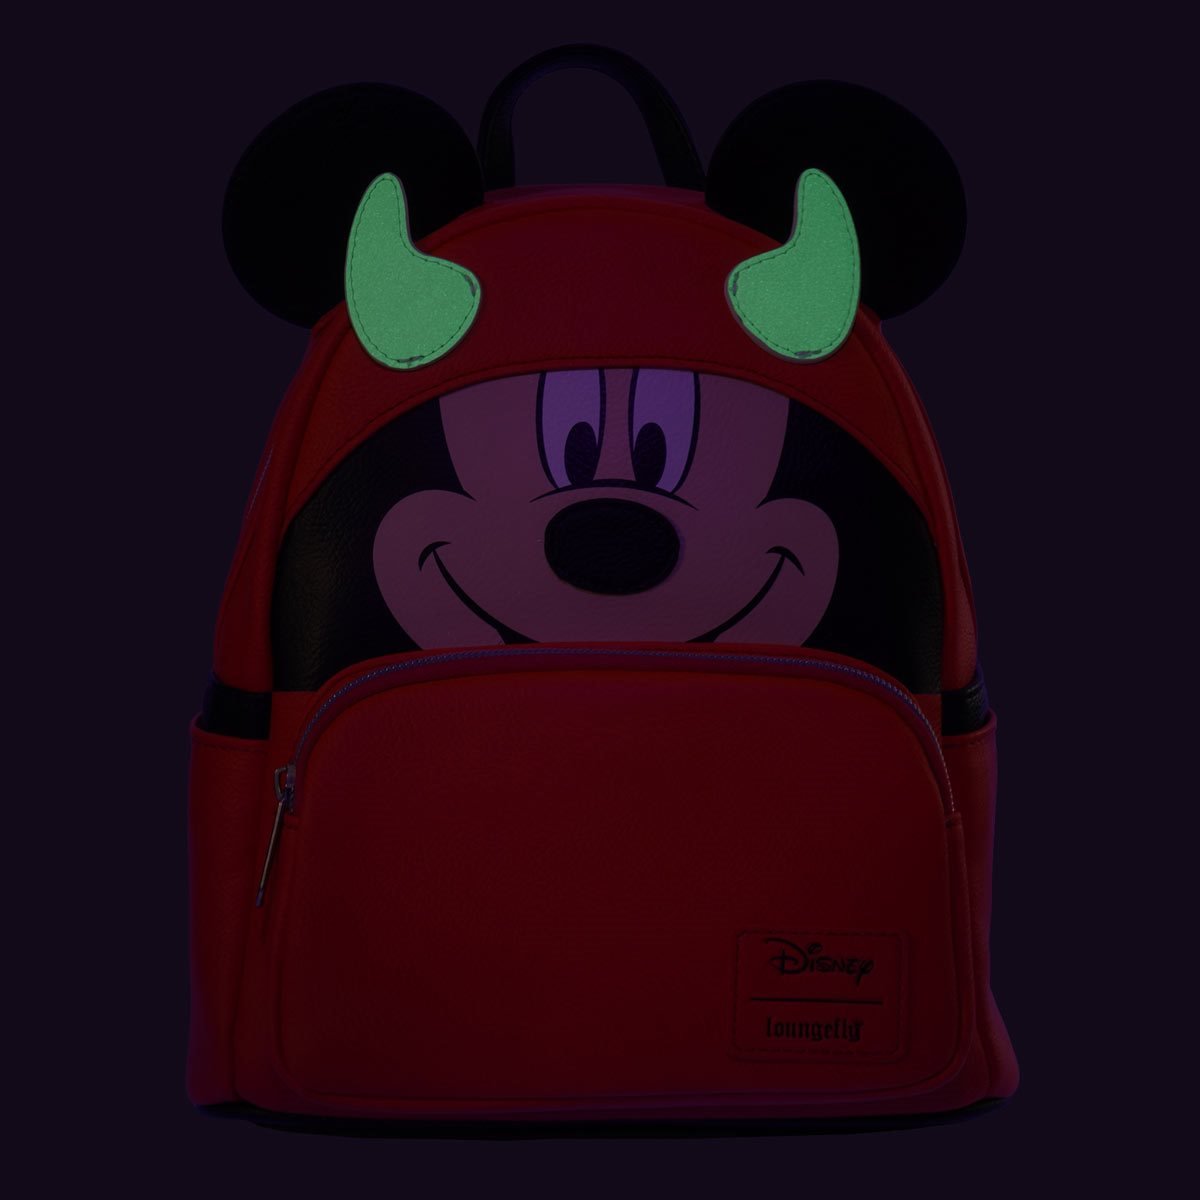 Loungefly Disney Mickey Mouse Devil Mickey Mini Backpack - Entertainment Earth Ex - Glow in the Dark